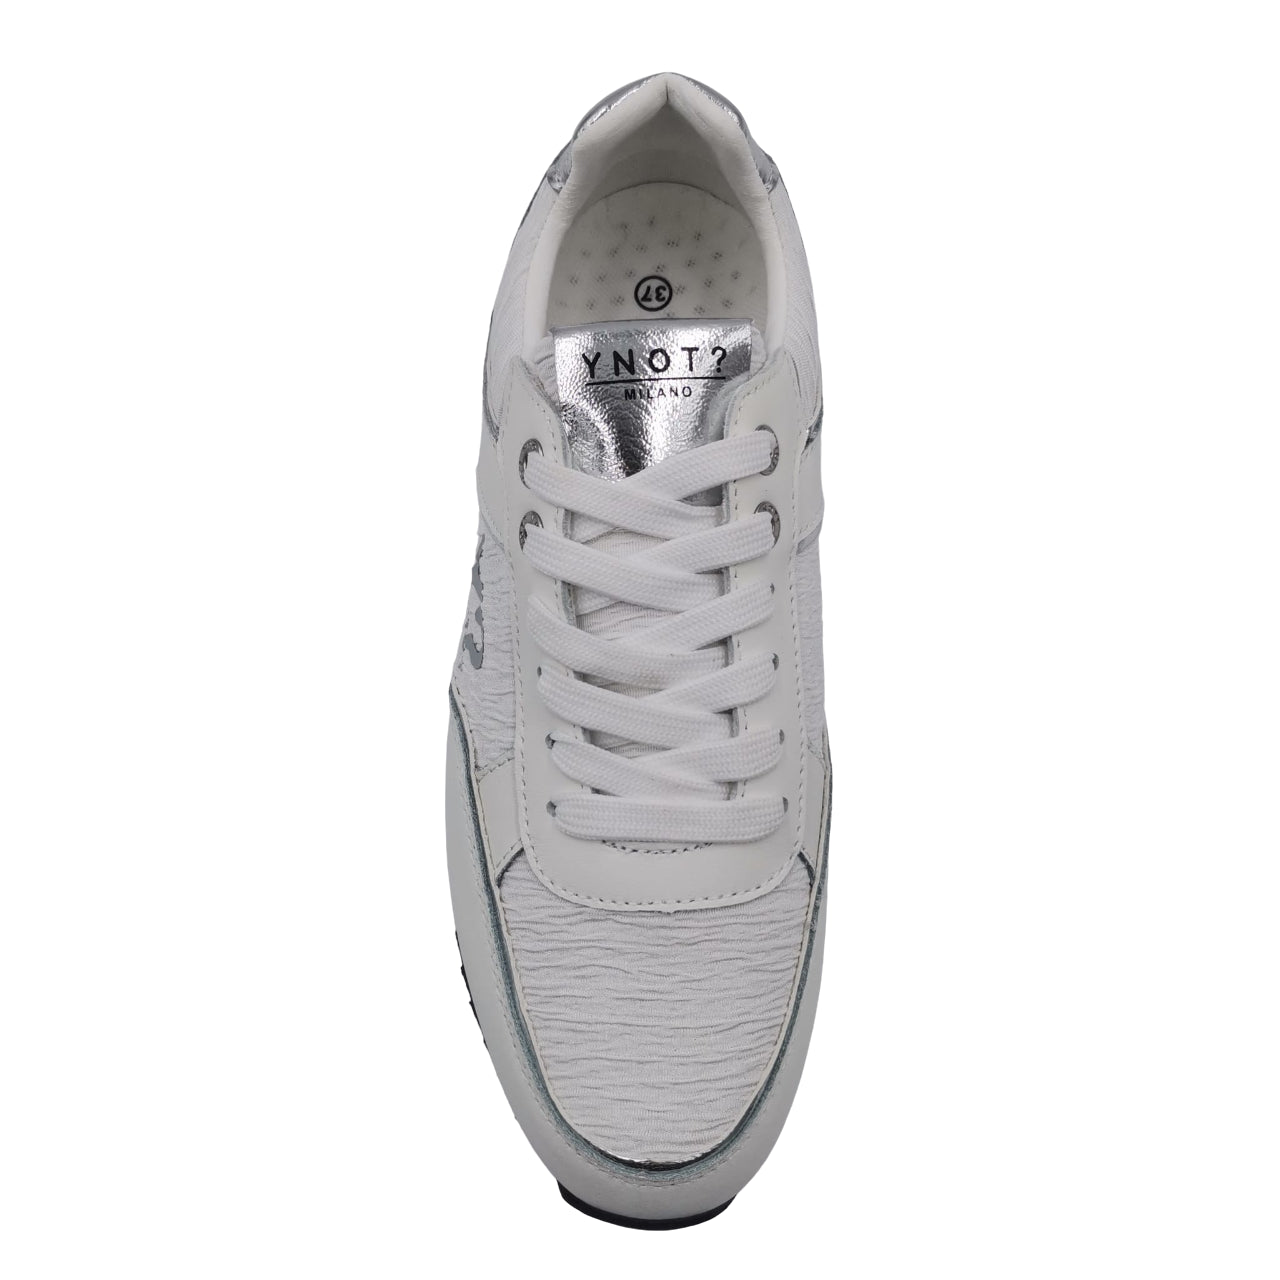 Sneakers Y Not? Donna White Bianco